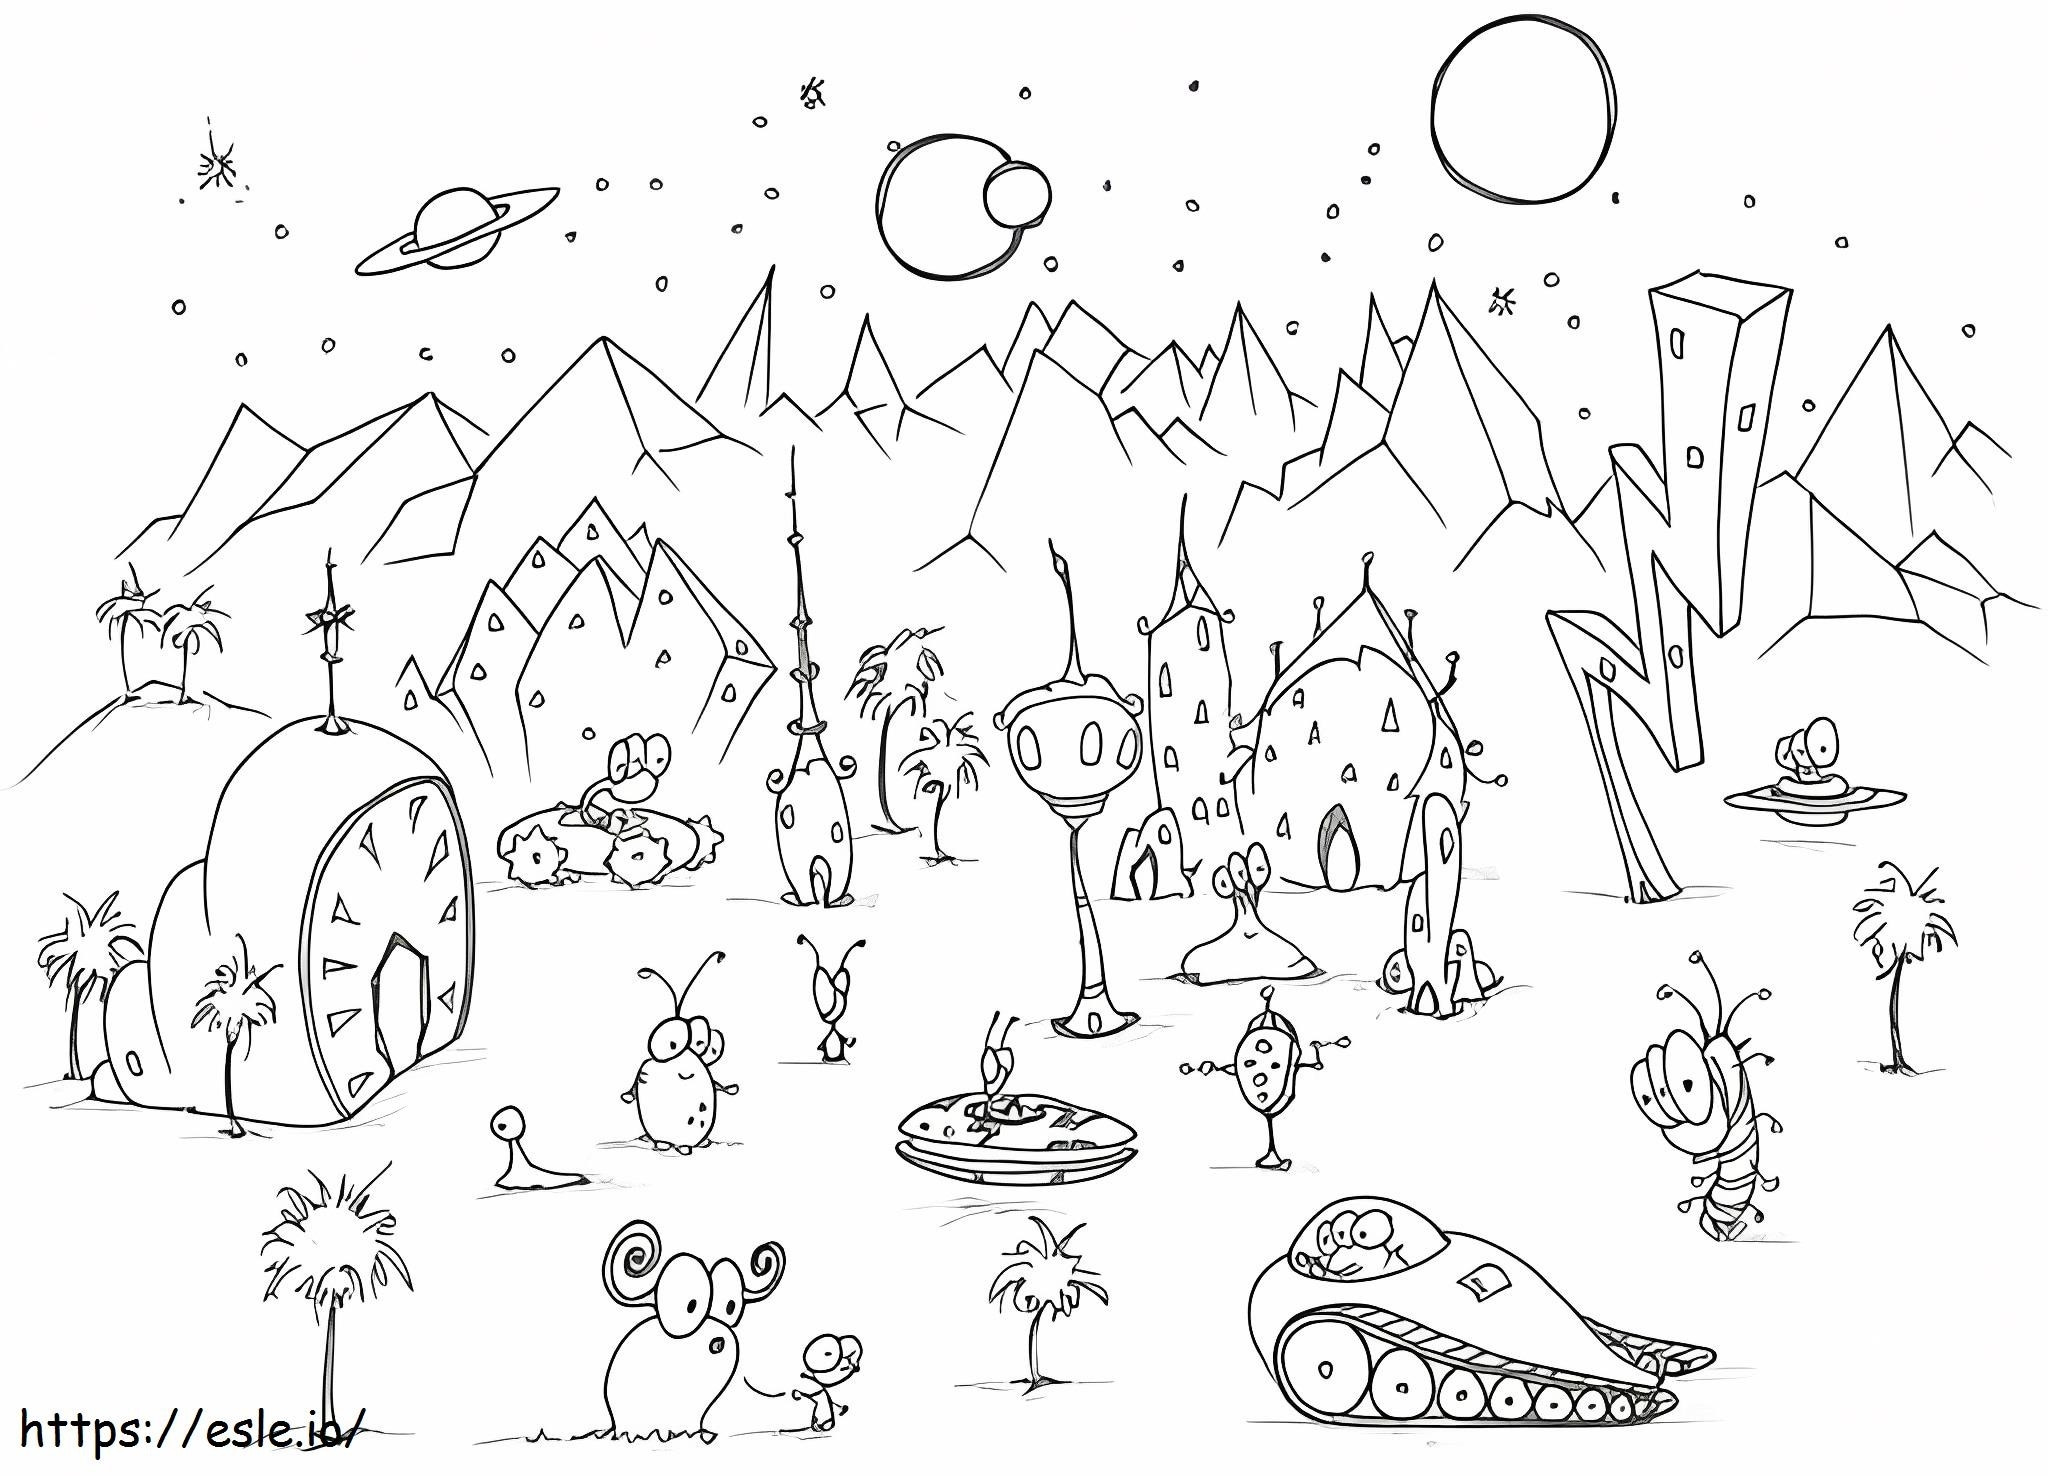 UFOs And New Planets coloring page